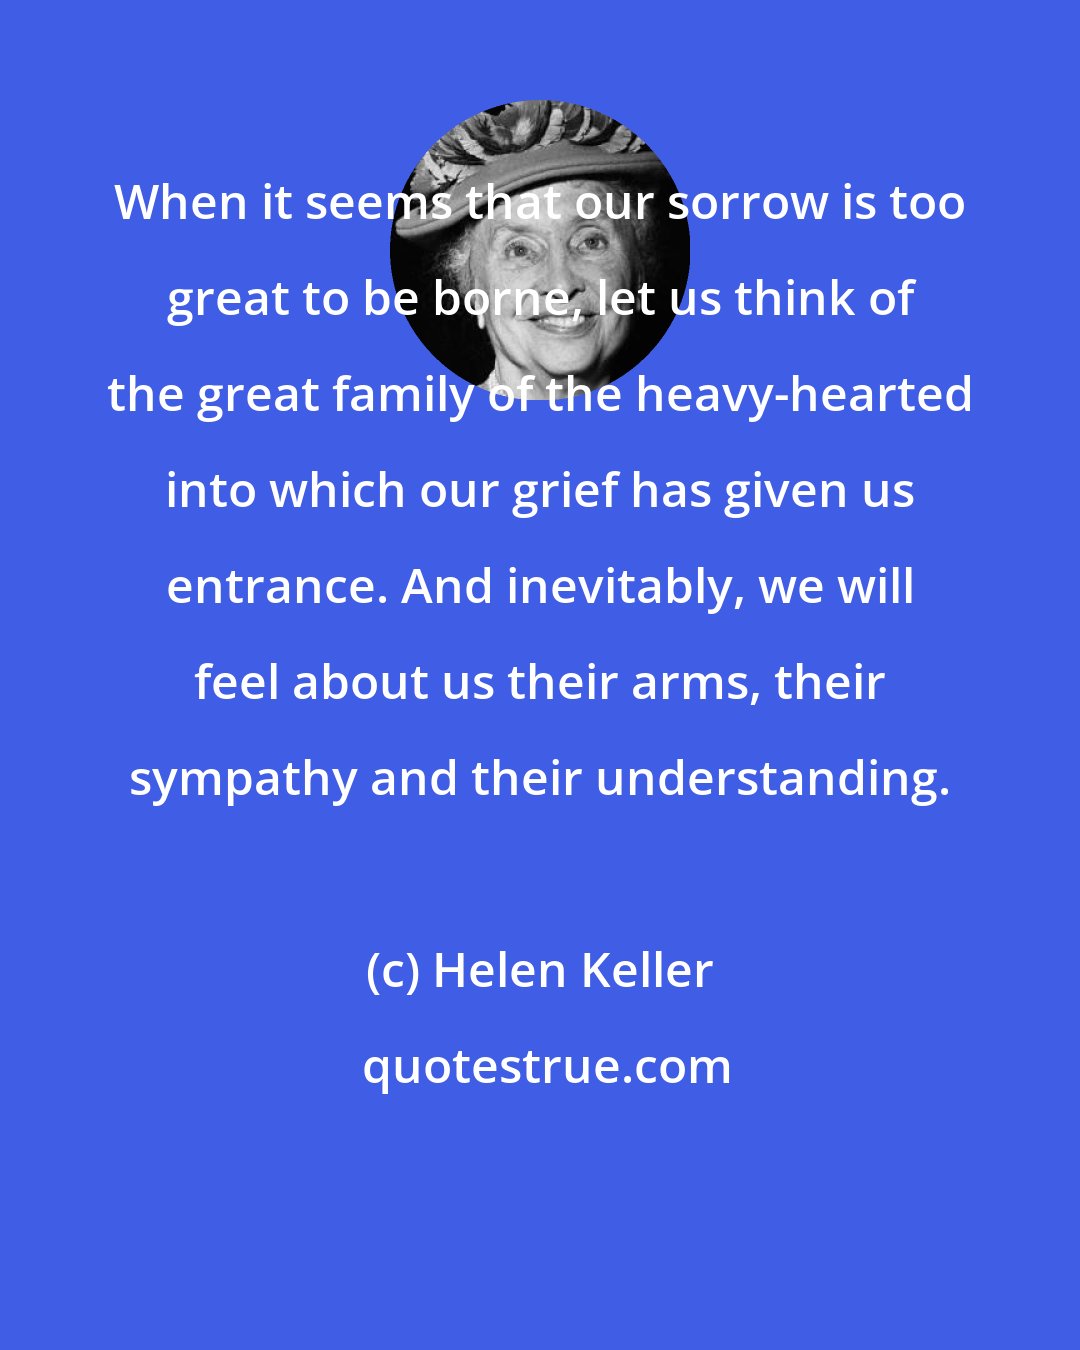 Helen Keller: When it seems that our sorrow is too great to be borne, let us think of the great family of the heavy-hearted into which our grief has given us entrance. And inevitably, we will feel about us their arms, their sympathy and their understanding.